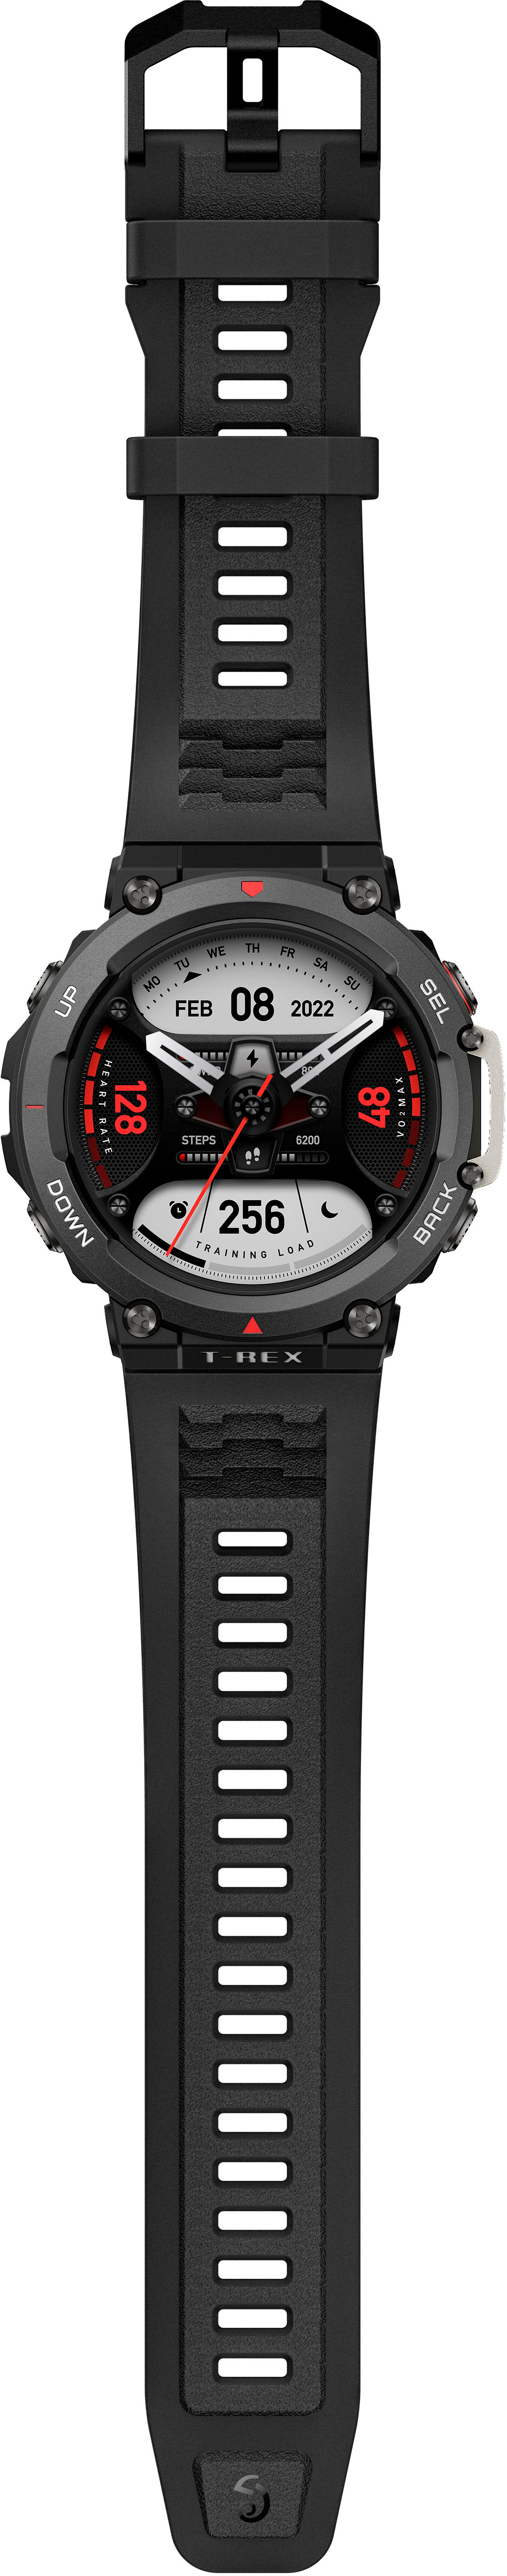  Amazfit T-Rex 2 Smart Watch for Men, Dual-Band & 6 Satellite  Positioning, 24-Day Battery Life, Ultra-Low Temperature Operation, Rugged  Outdoor GPS Military Watch, Black(Renewed) : Electronics